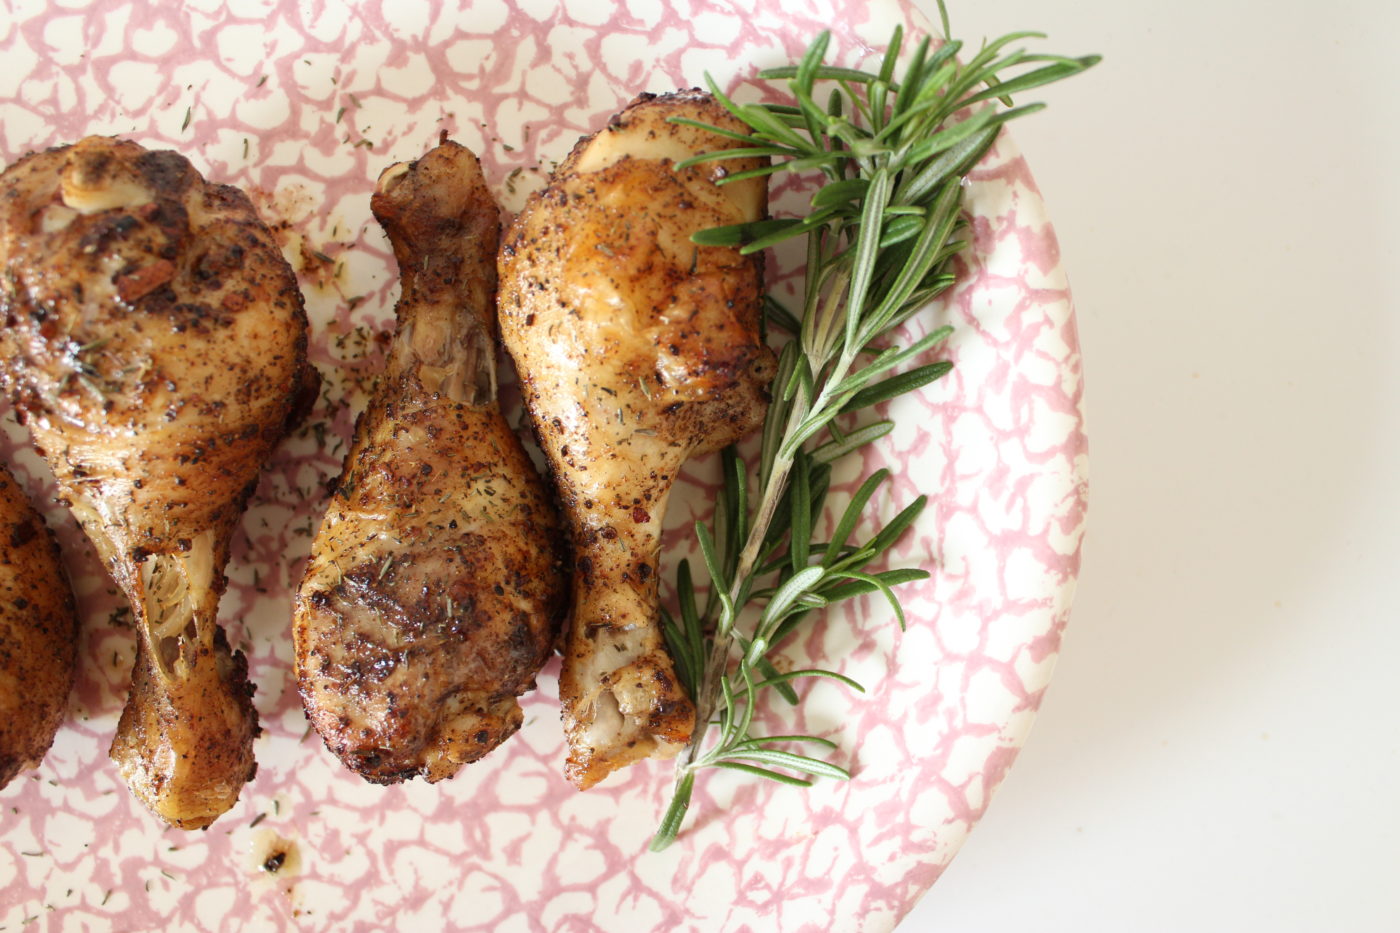 Jerk chicken is a flavorful way to spice up your dinner tables. Here's how you can make a simplified version of the traditional recipe.